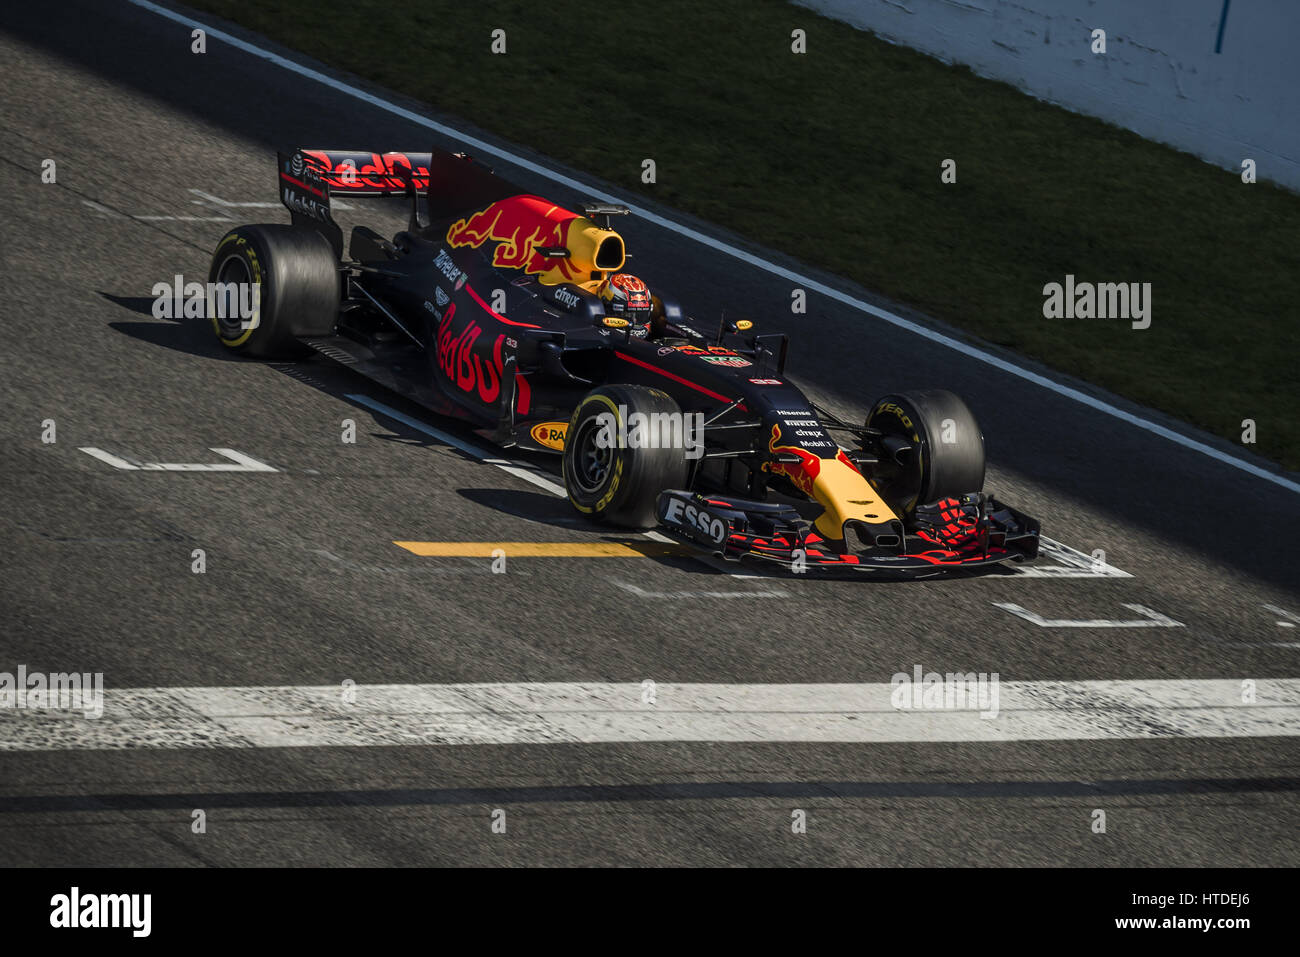 Montmelo, Catalonia, Spain. 10th Mar, 2017. MAX VERSTAPPEN (NED) of team Red Bull practices the start on track during day 8 of Formula One testing at Circuit de Catalunya Credit: Matthias Oesterle/ZUMA Wire/Alamy Live News Stock Photo